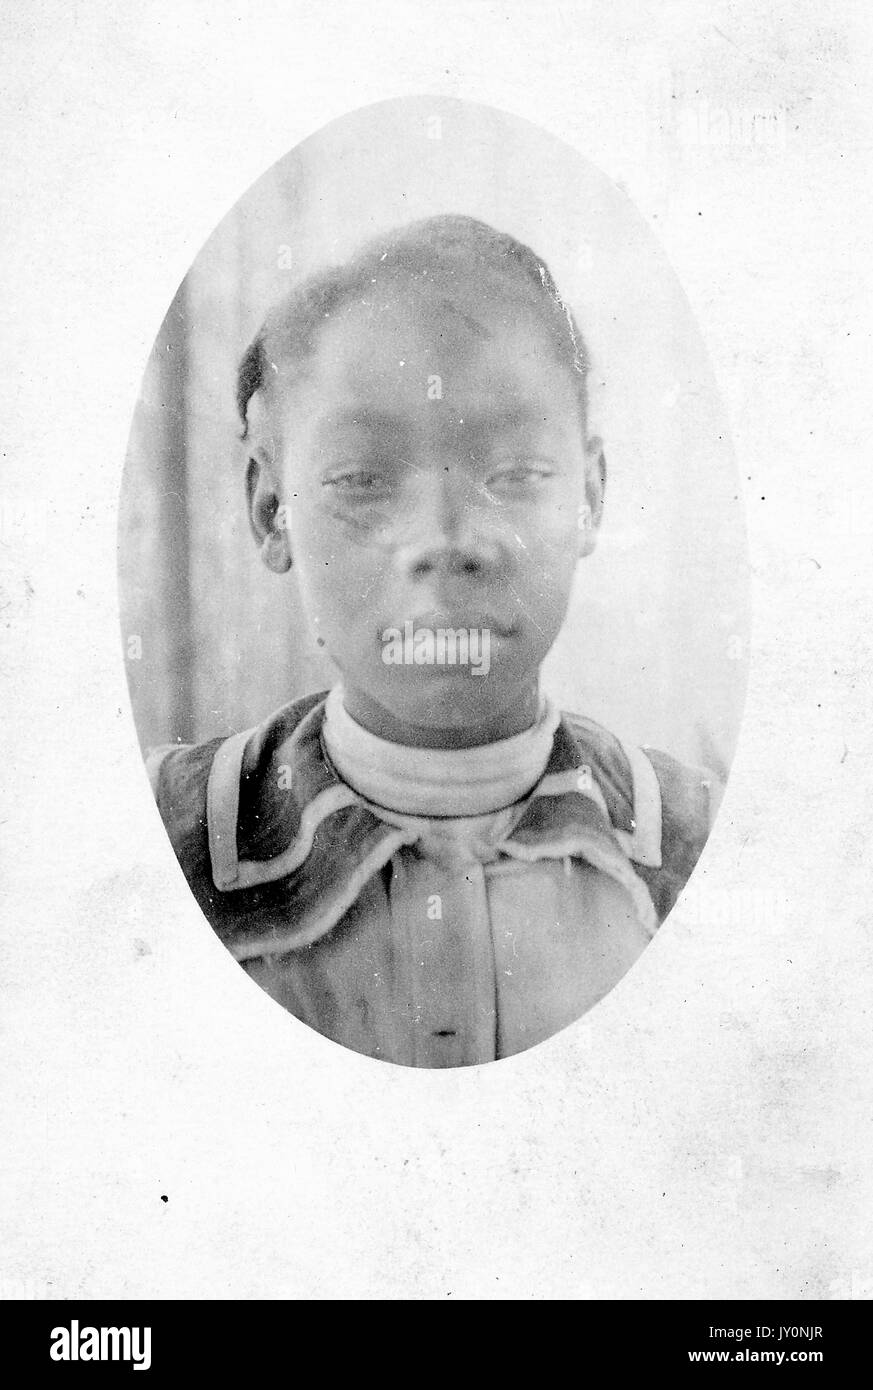 Oval headshot of a young African American woman, wearing a white turtleneck under a collared coat, with a serious facial expression, 1920. Stock Photo